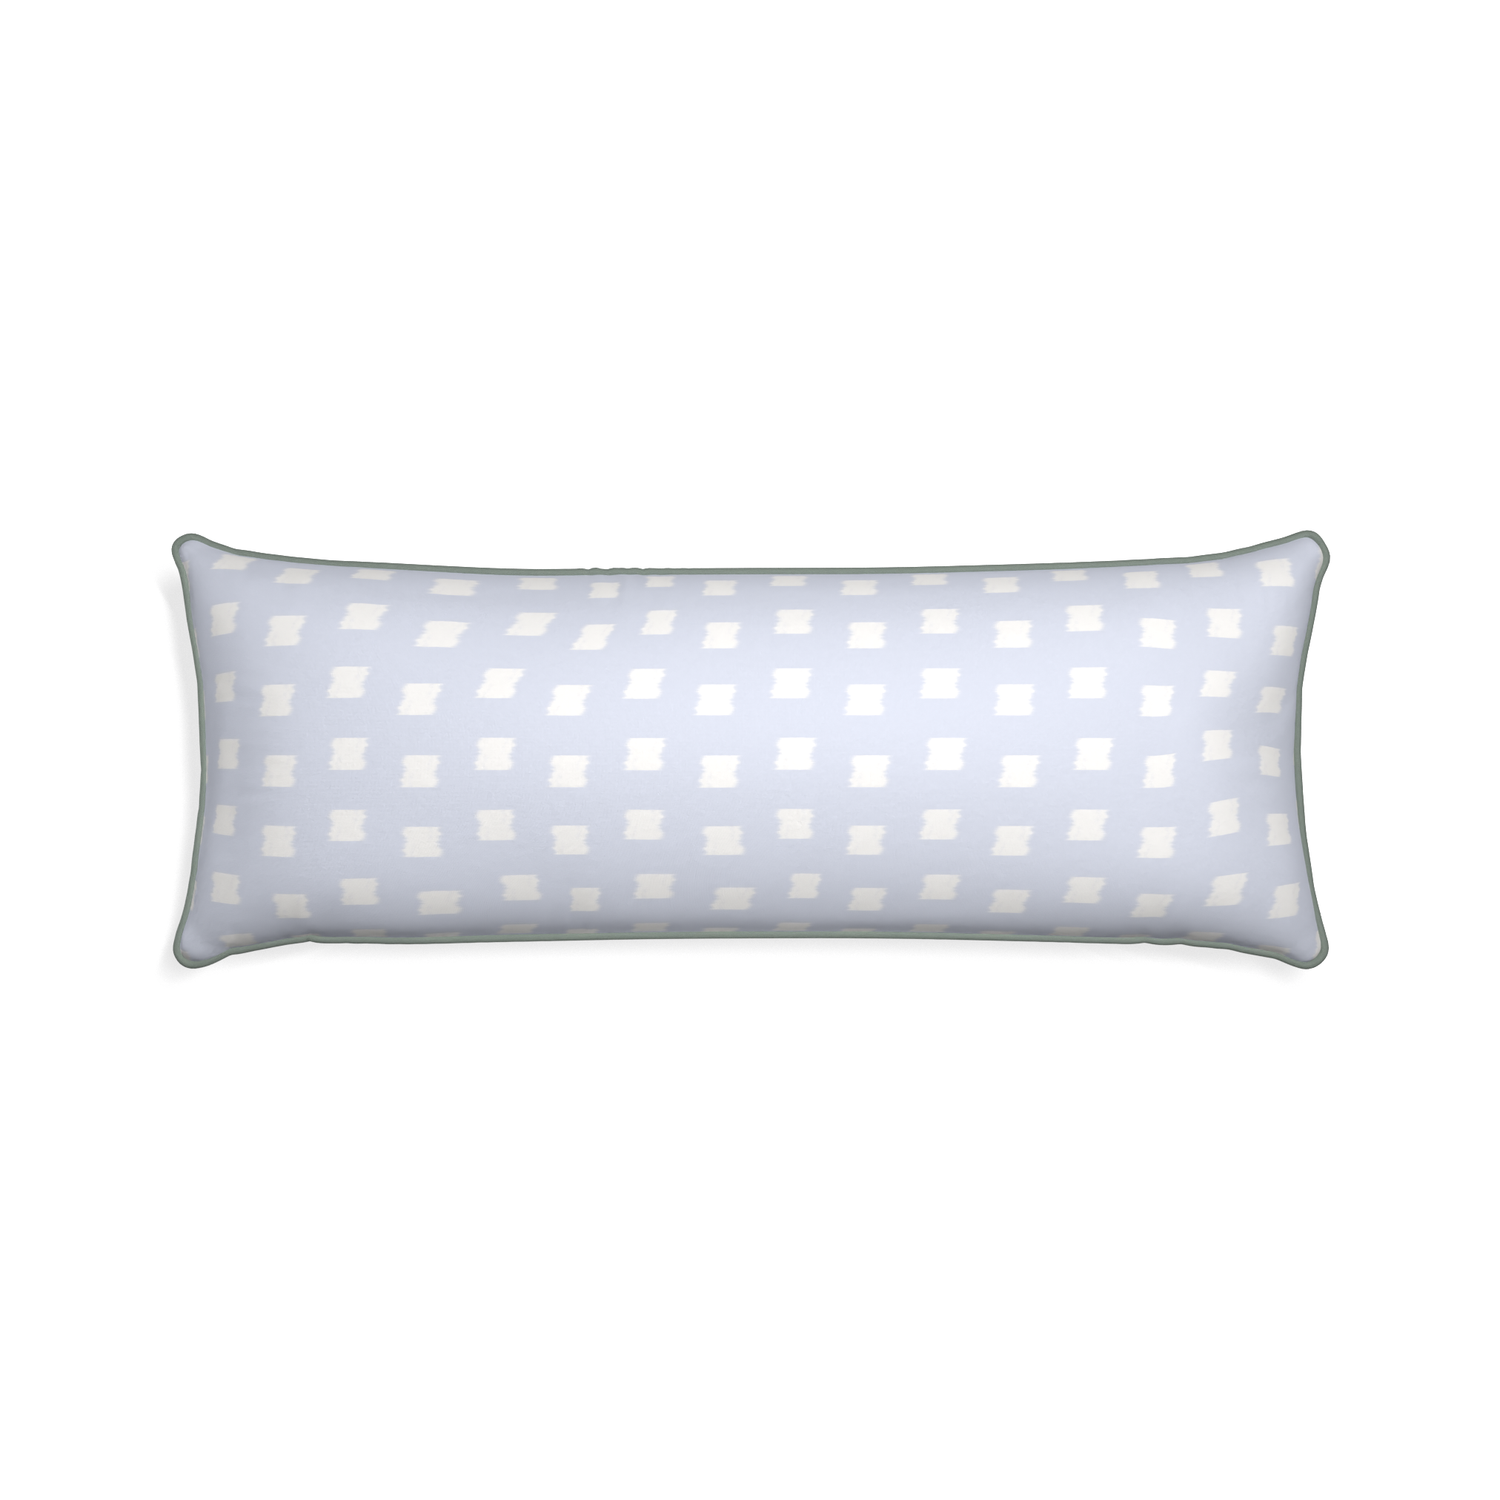 Xl-lumbar denton custom sky blue patternpillow with sage piping on white background